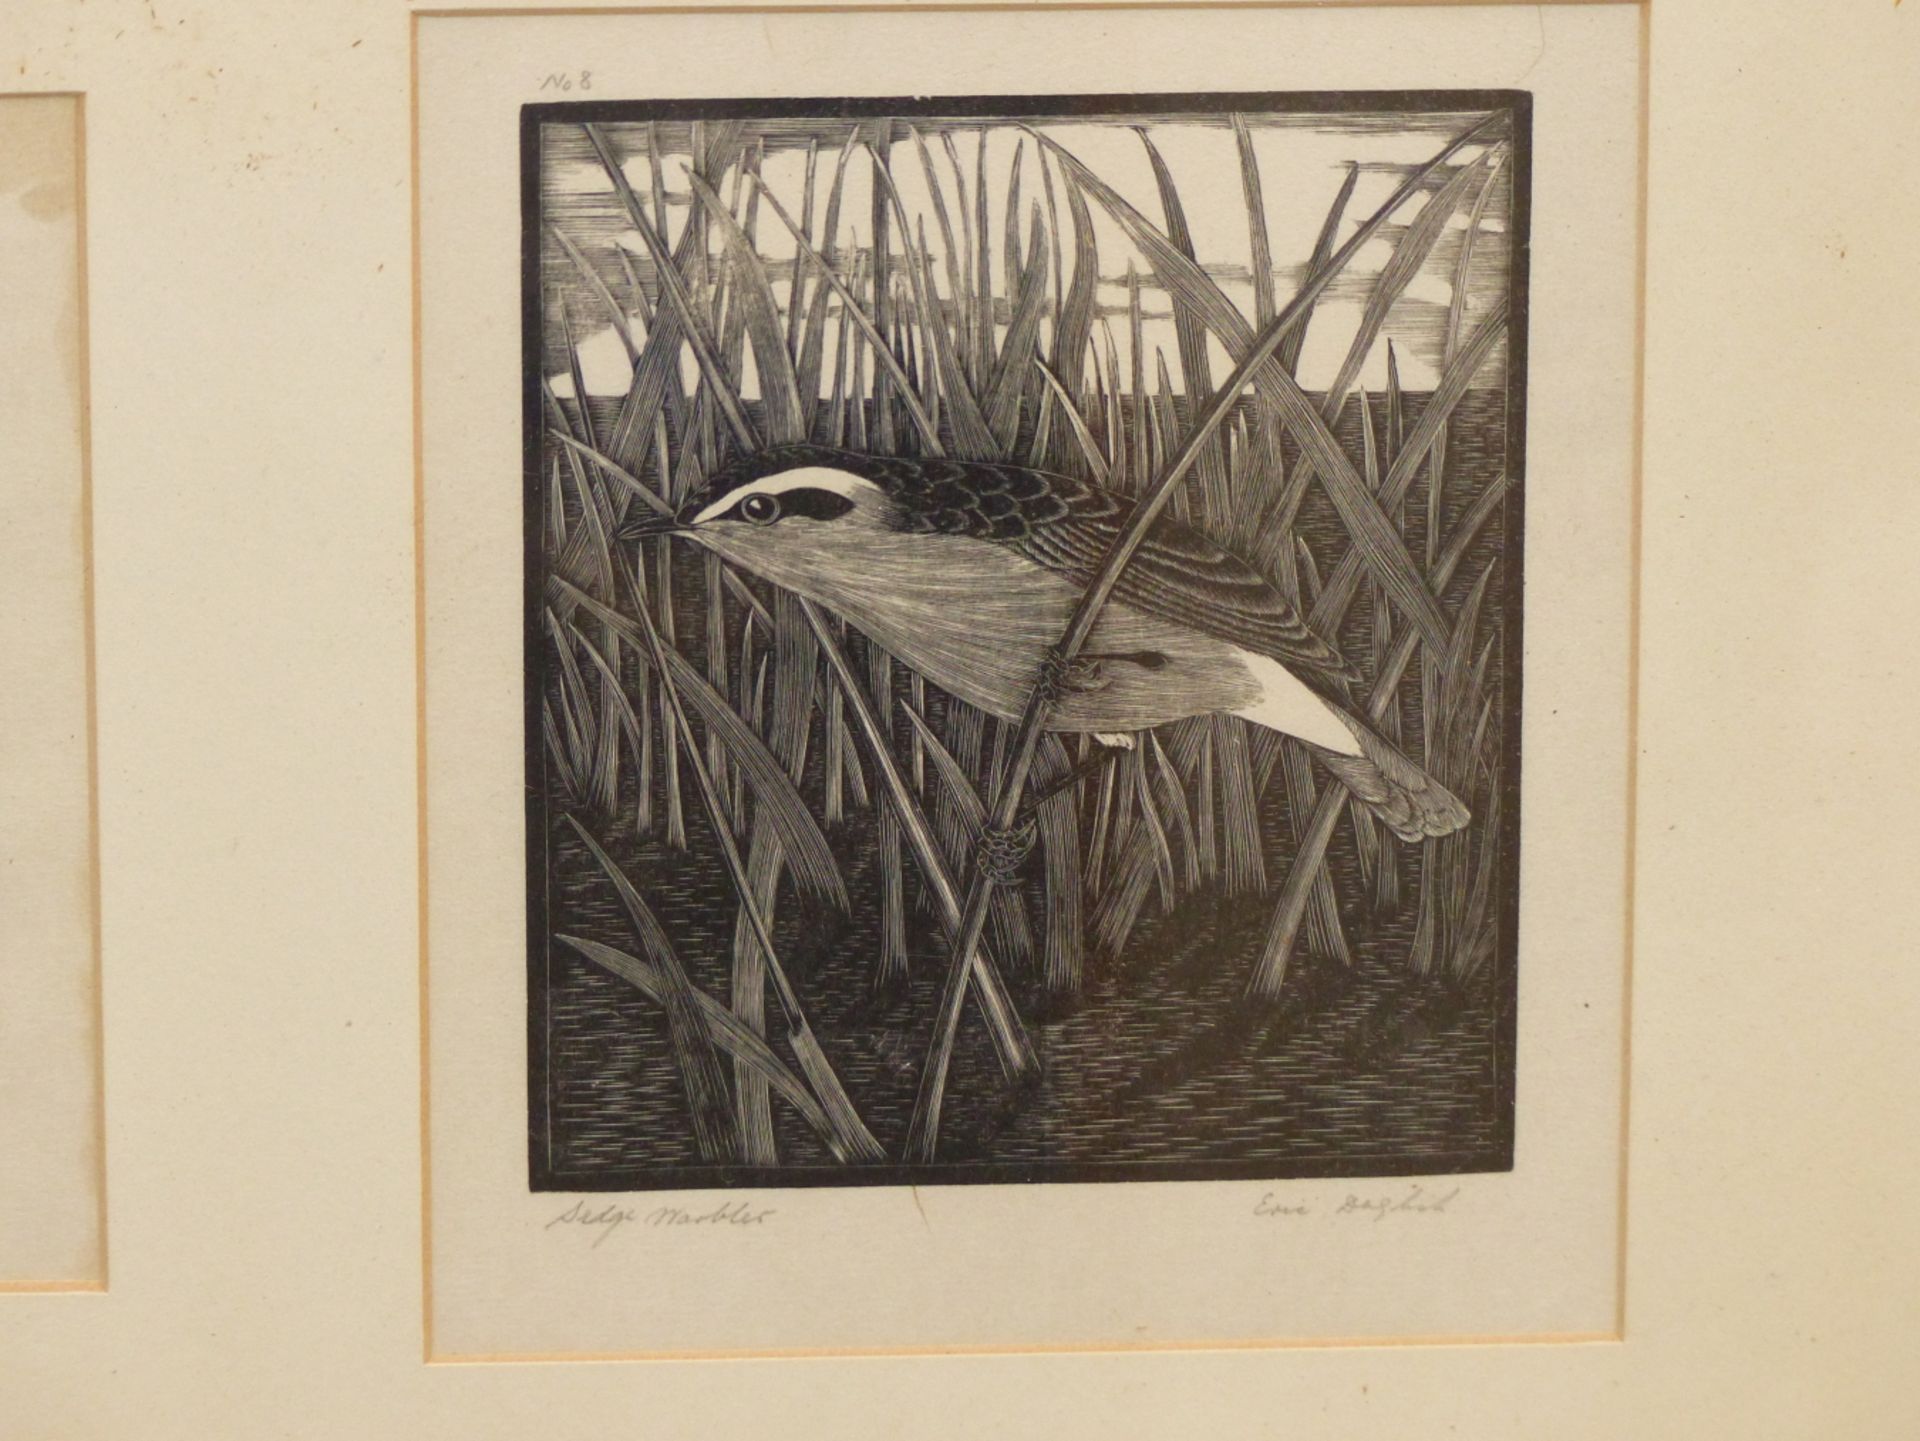 ERIC FITCH DAGLISH (1894-1964), A SET OF SIX BOOK ILLUSTRATIONS, "SWALLOW & MARTIN", "TEAL", SEDGE - Image 4 of 8